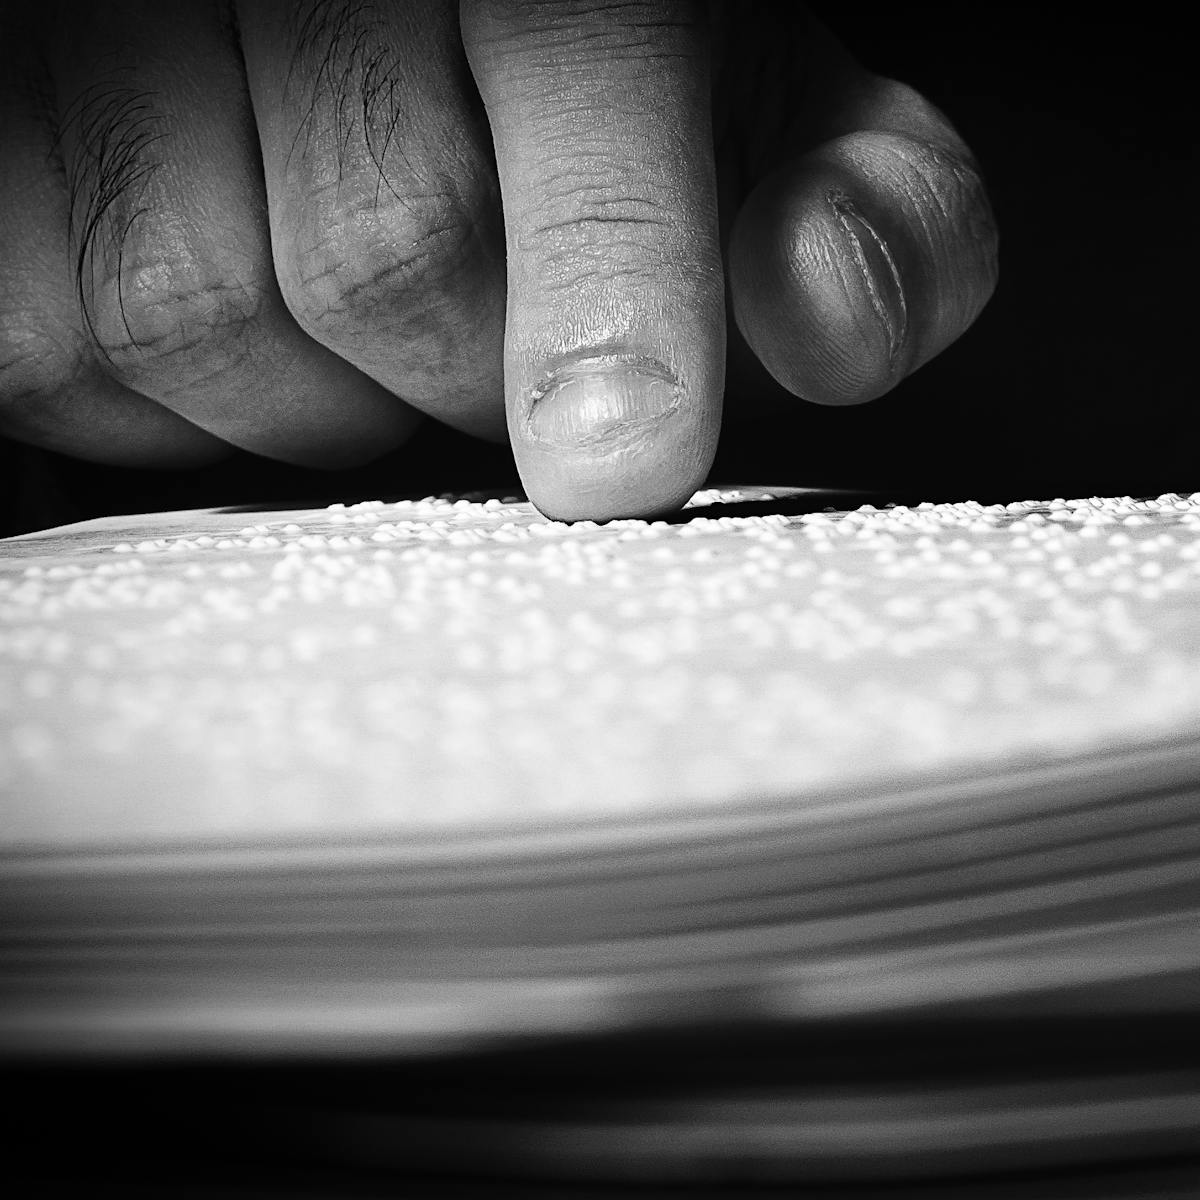 Black and white photograph of a close-up of a man's hand, whose index finger is resting lightly on white sheets of Braille. The foreground and background are dark black, casting the hand and paper sheets into a spotlight.